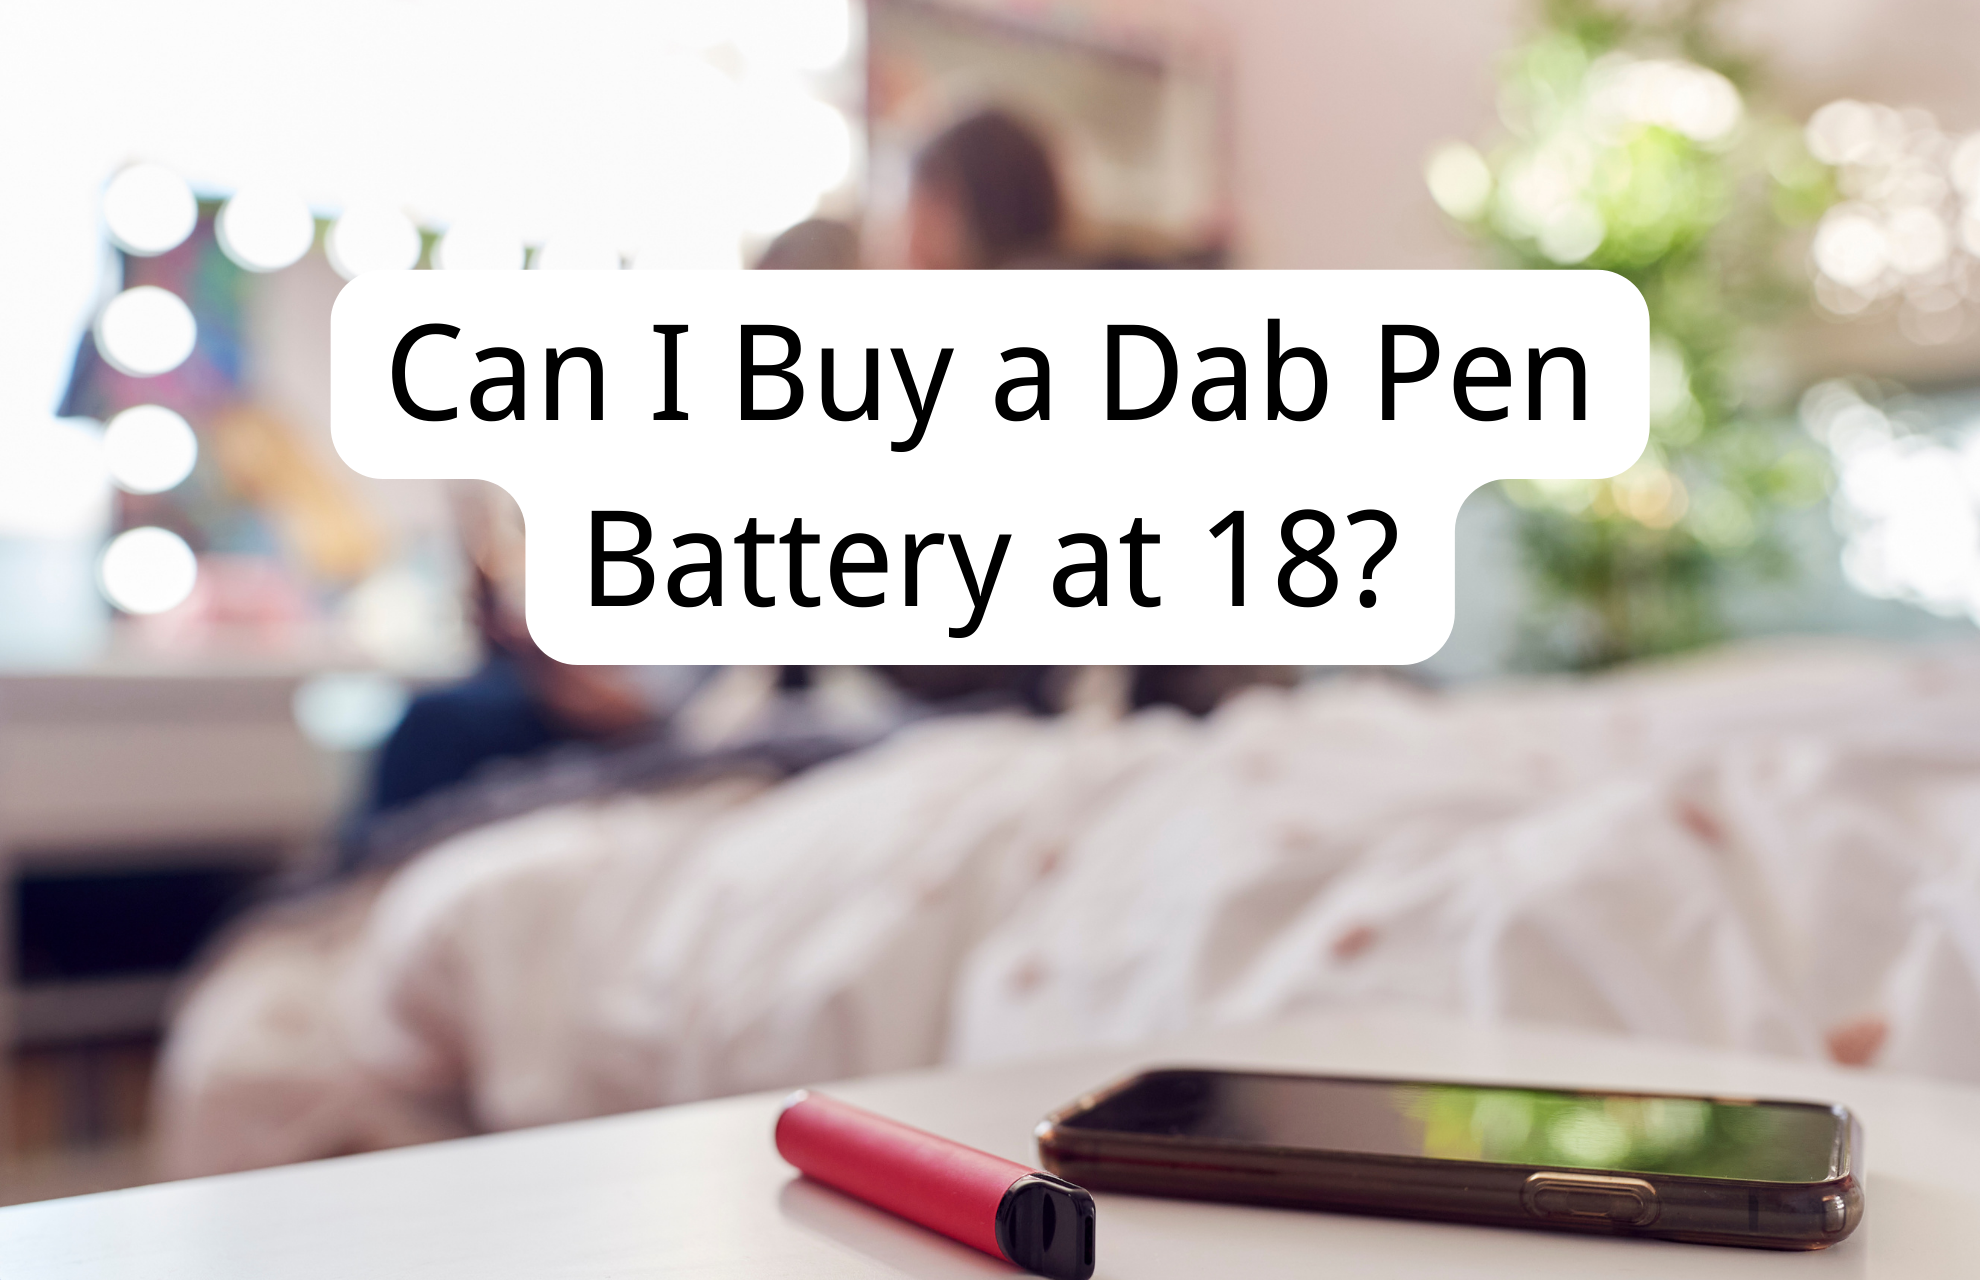 Can I Buy a Dab Pen Battery at 18?